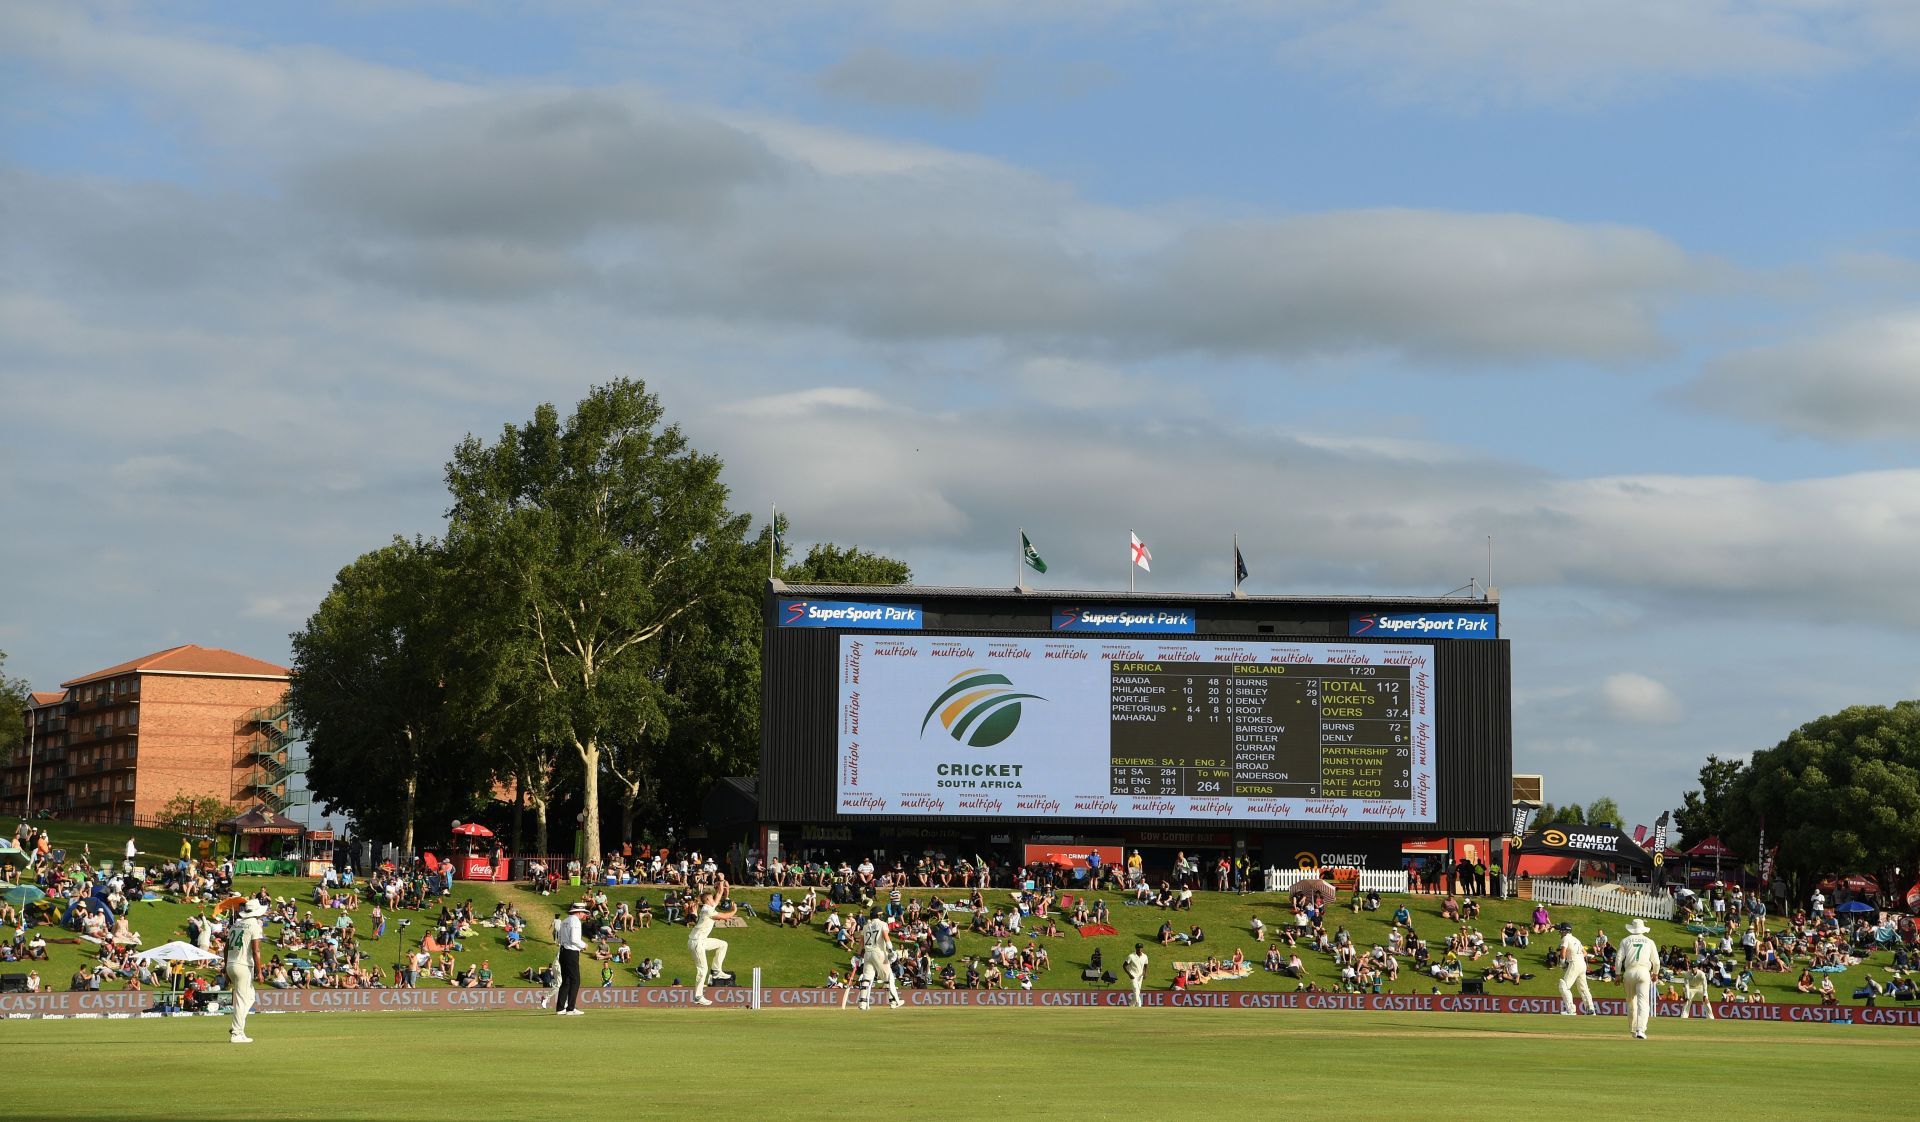 SuperSport Park will play host to the first Test between India and South Africa